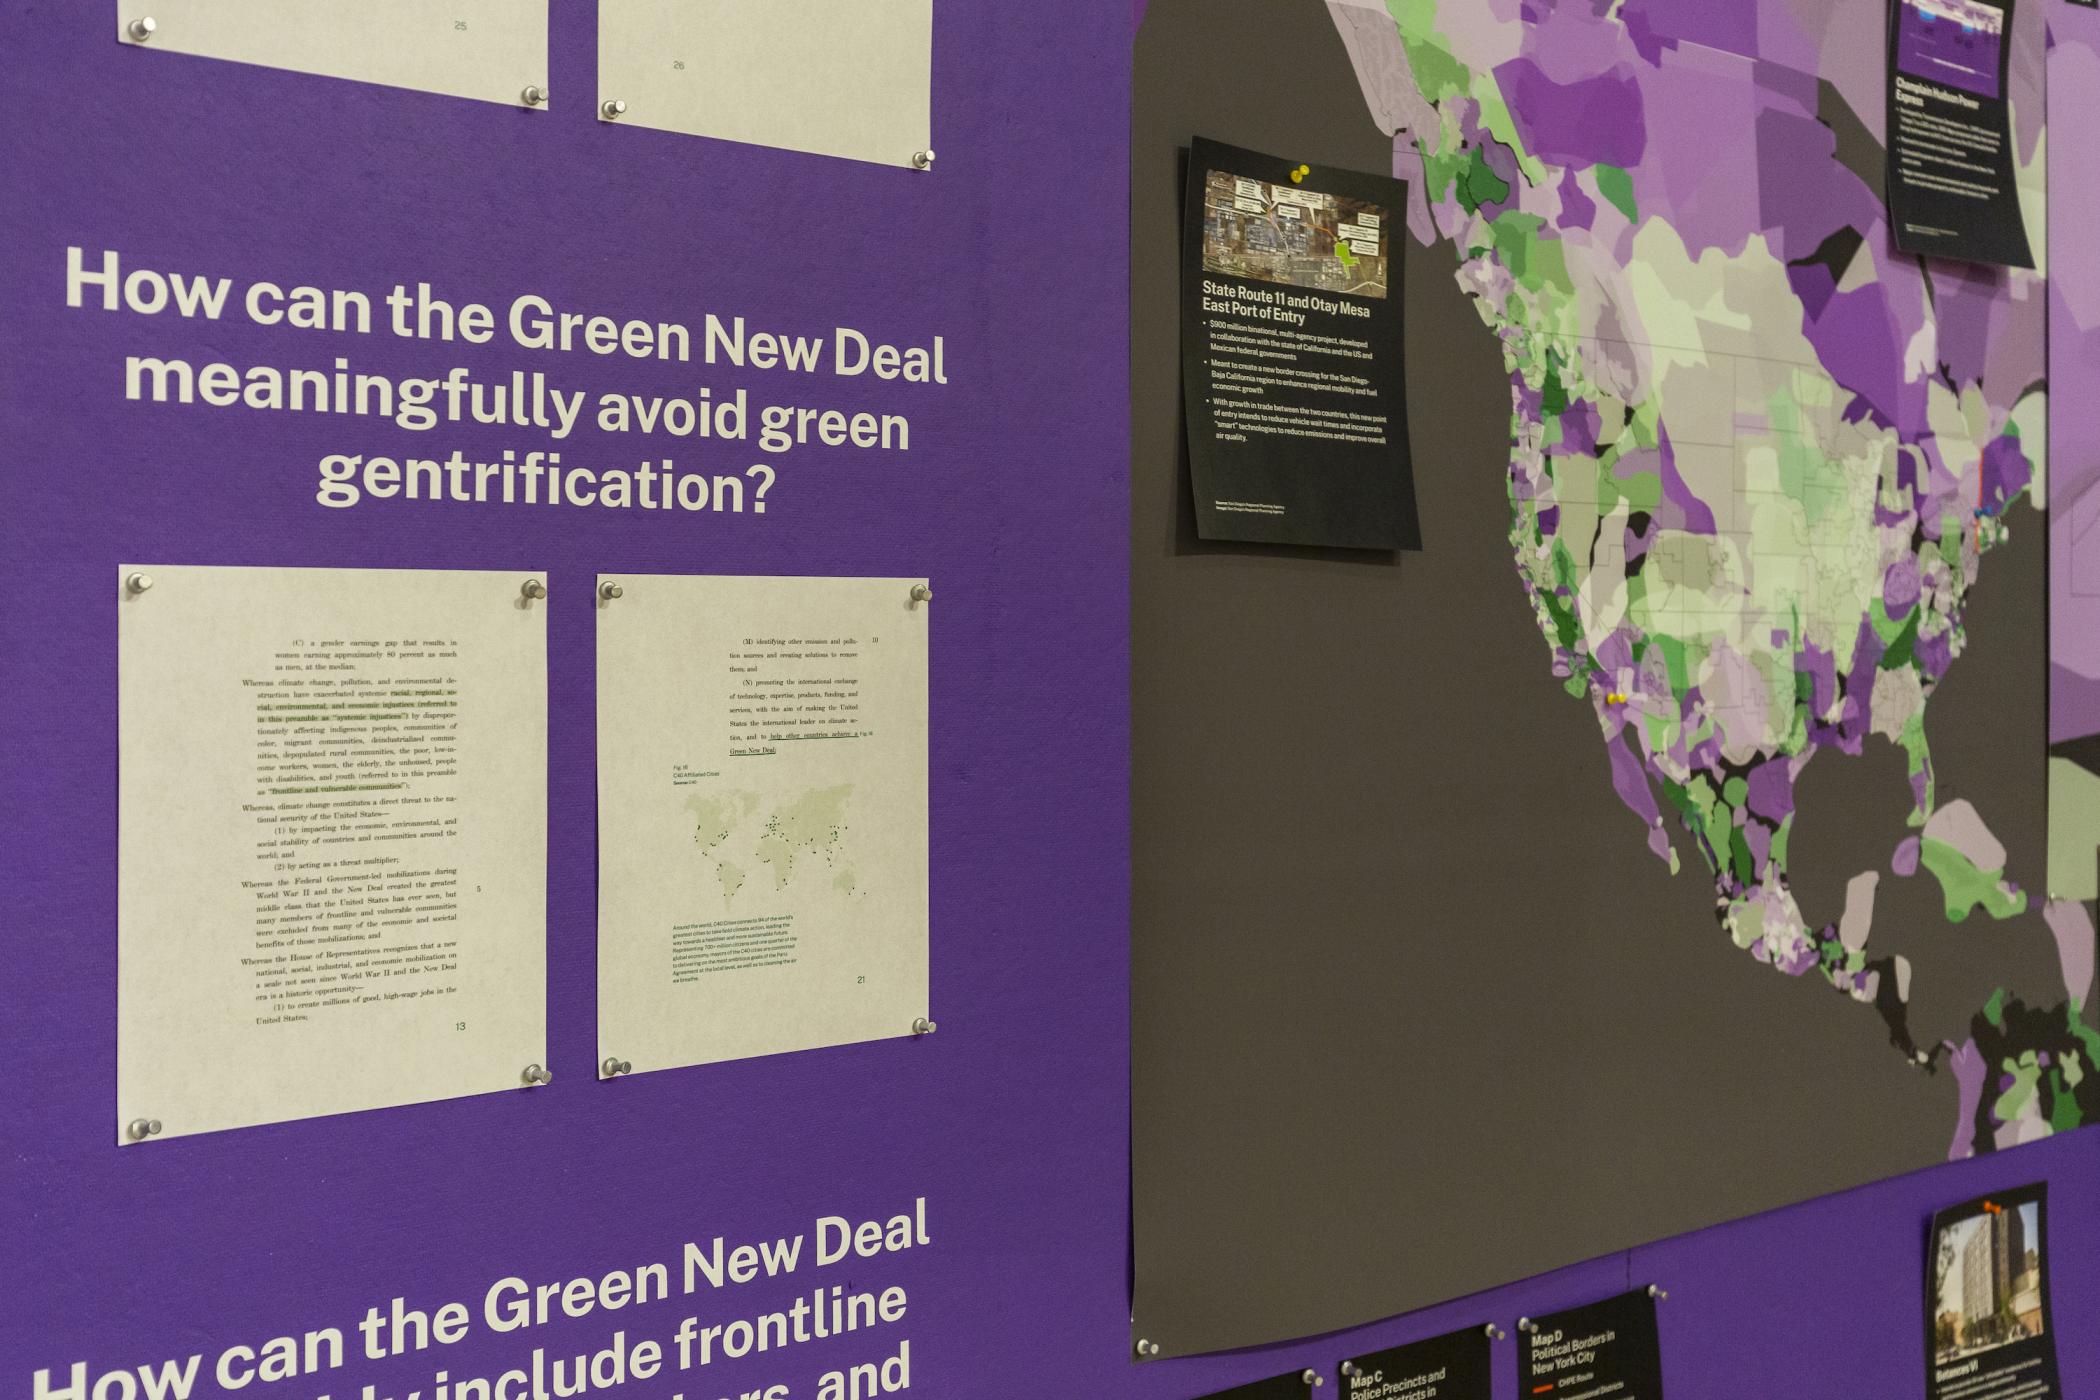 A close-up view of a map of North America and other Green New Deal–related data visualizations, including the question "How can the Green New Deal meaningfully avoid green gentrification?".